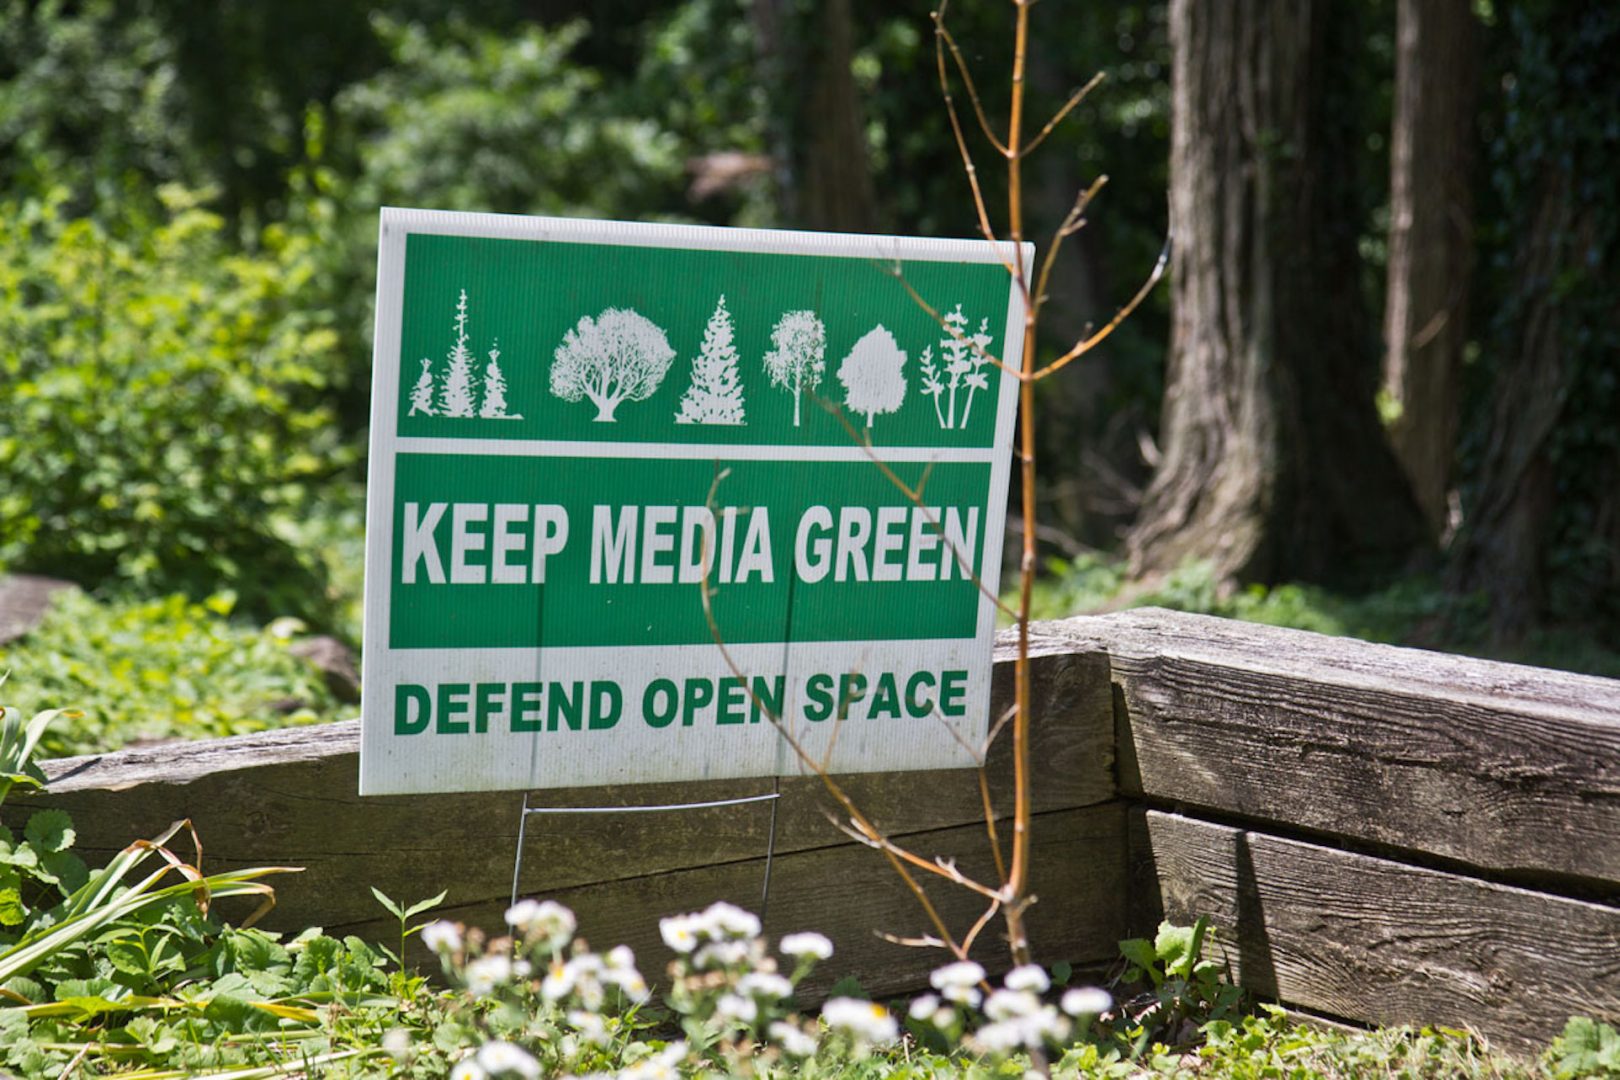 Signs posted in yards around Media, Pa., decry development in the area. (Kimberly Paynter/WHYY)